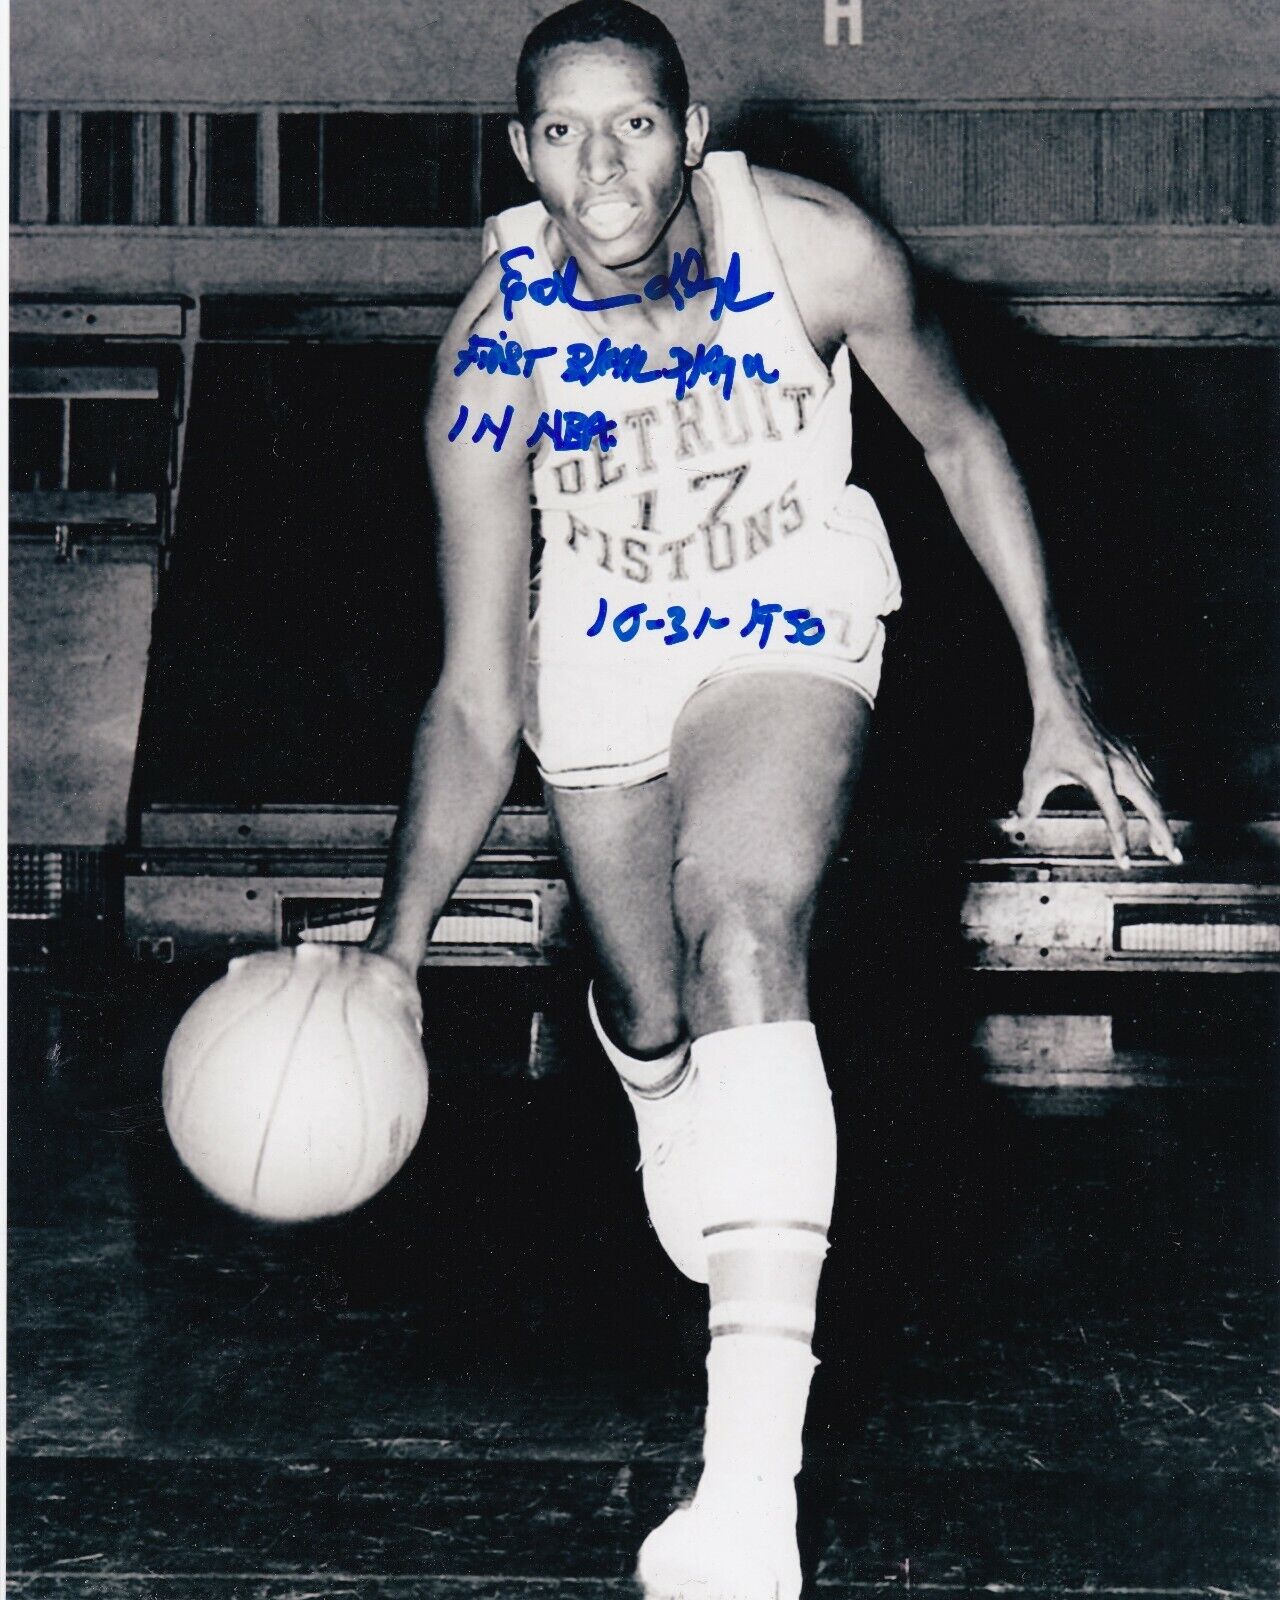 EARL LLOYD DETROIT PISTONS FIRST BLACK PLAYER IN NBA 10-31-1950 SIGNED 8x10